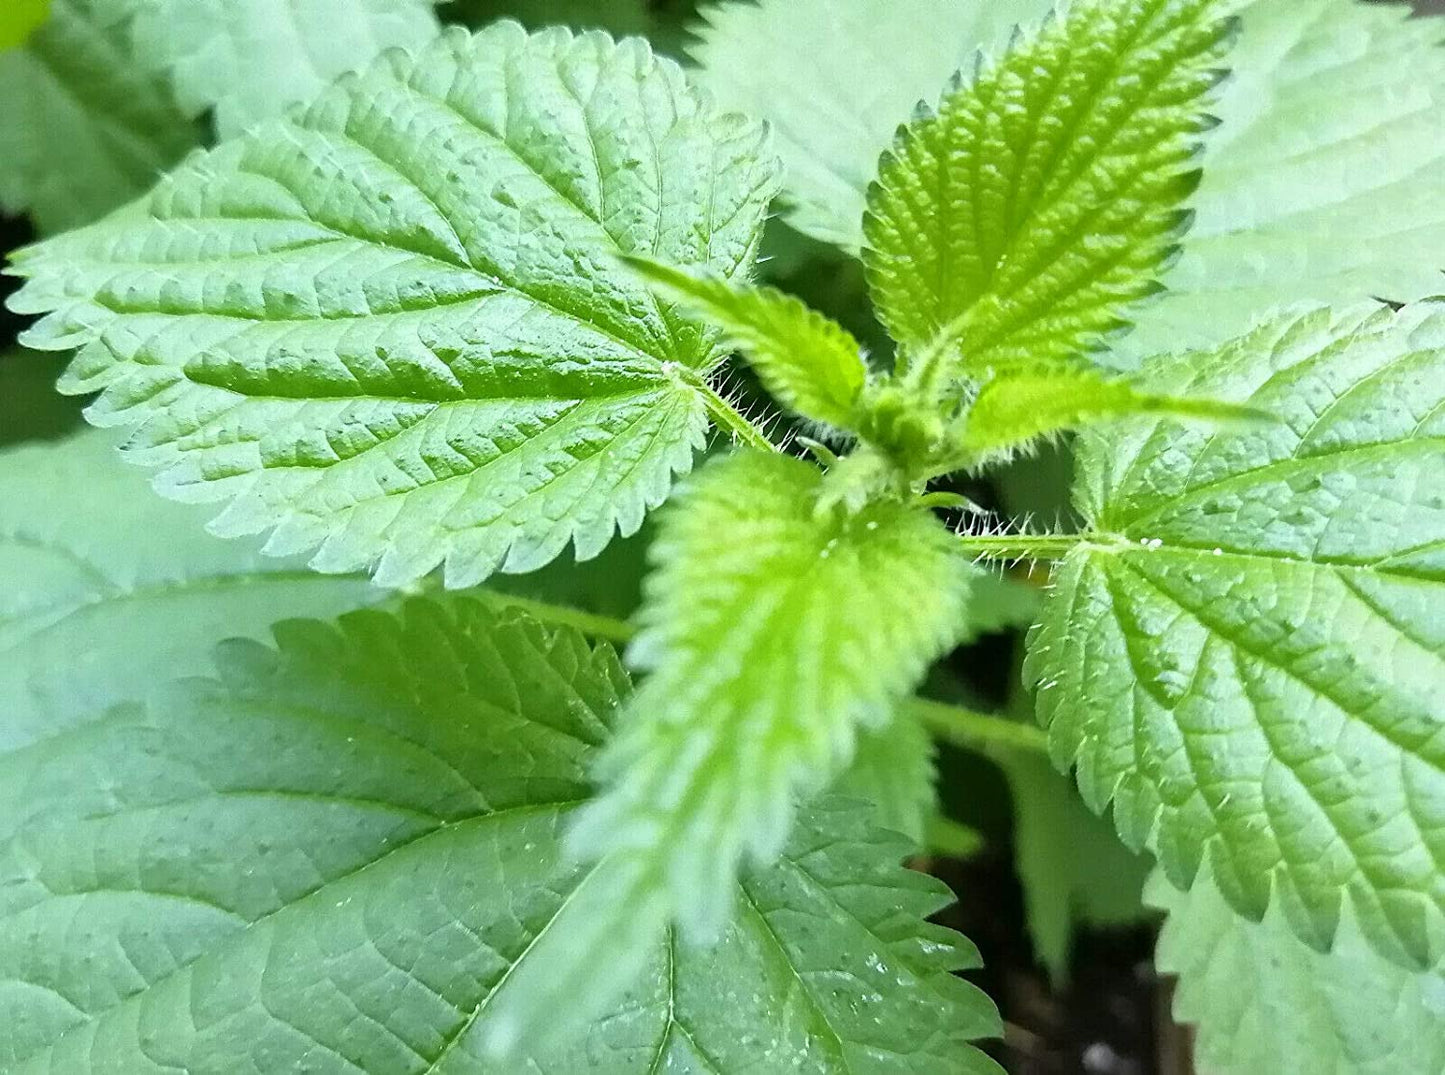 Organic Stinging Nettle 200 Herb Seeds - Common Nettle, Stinger, Urtica dioica